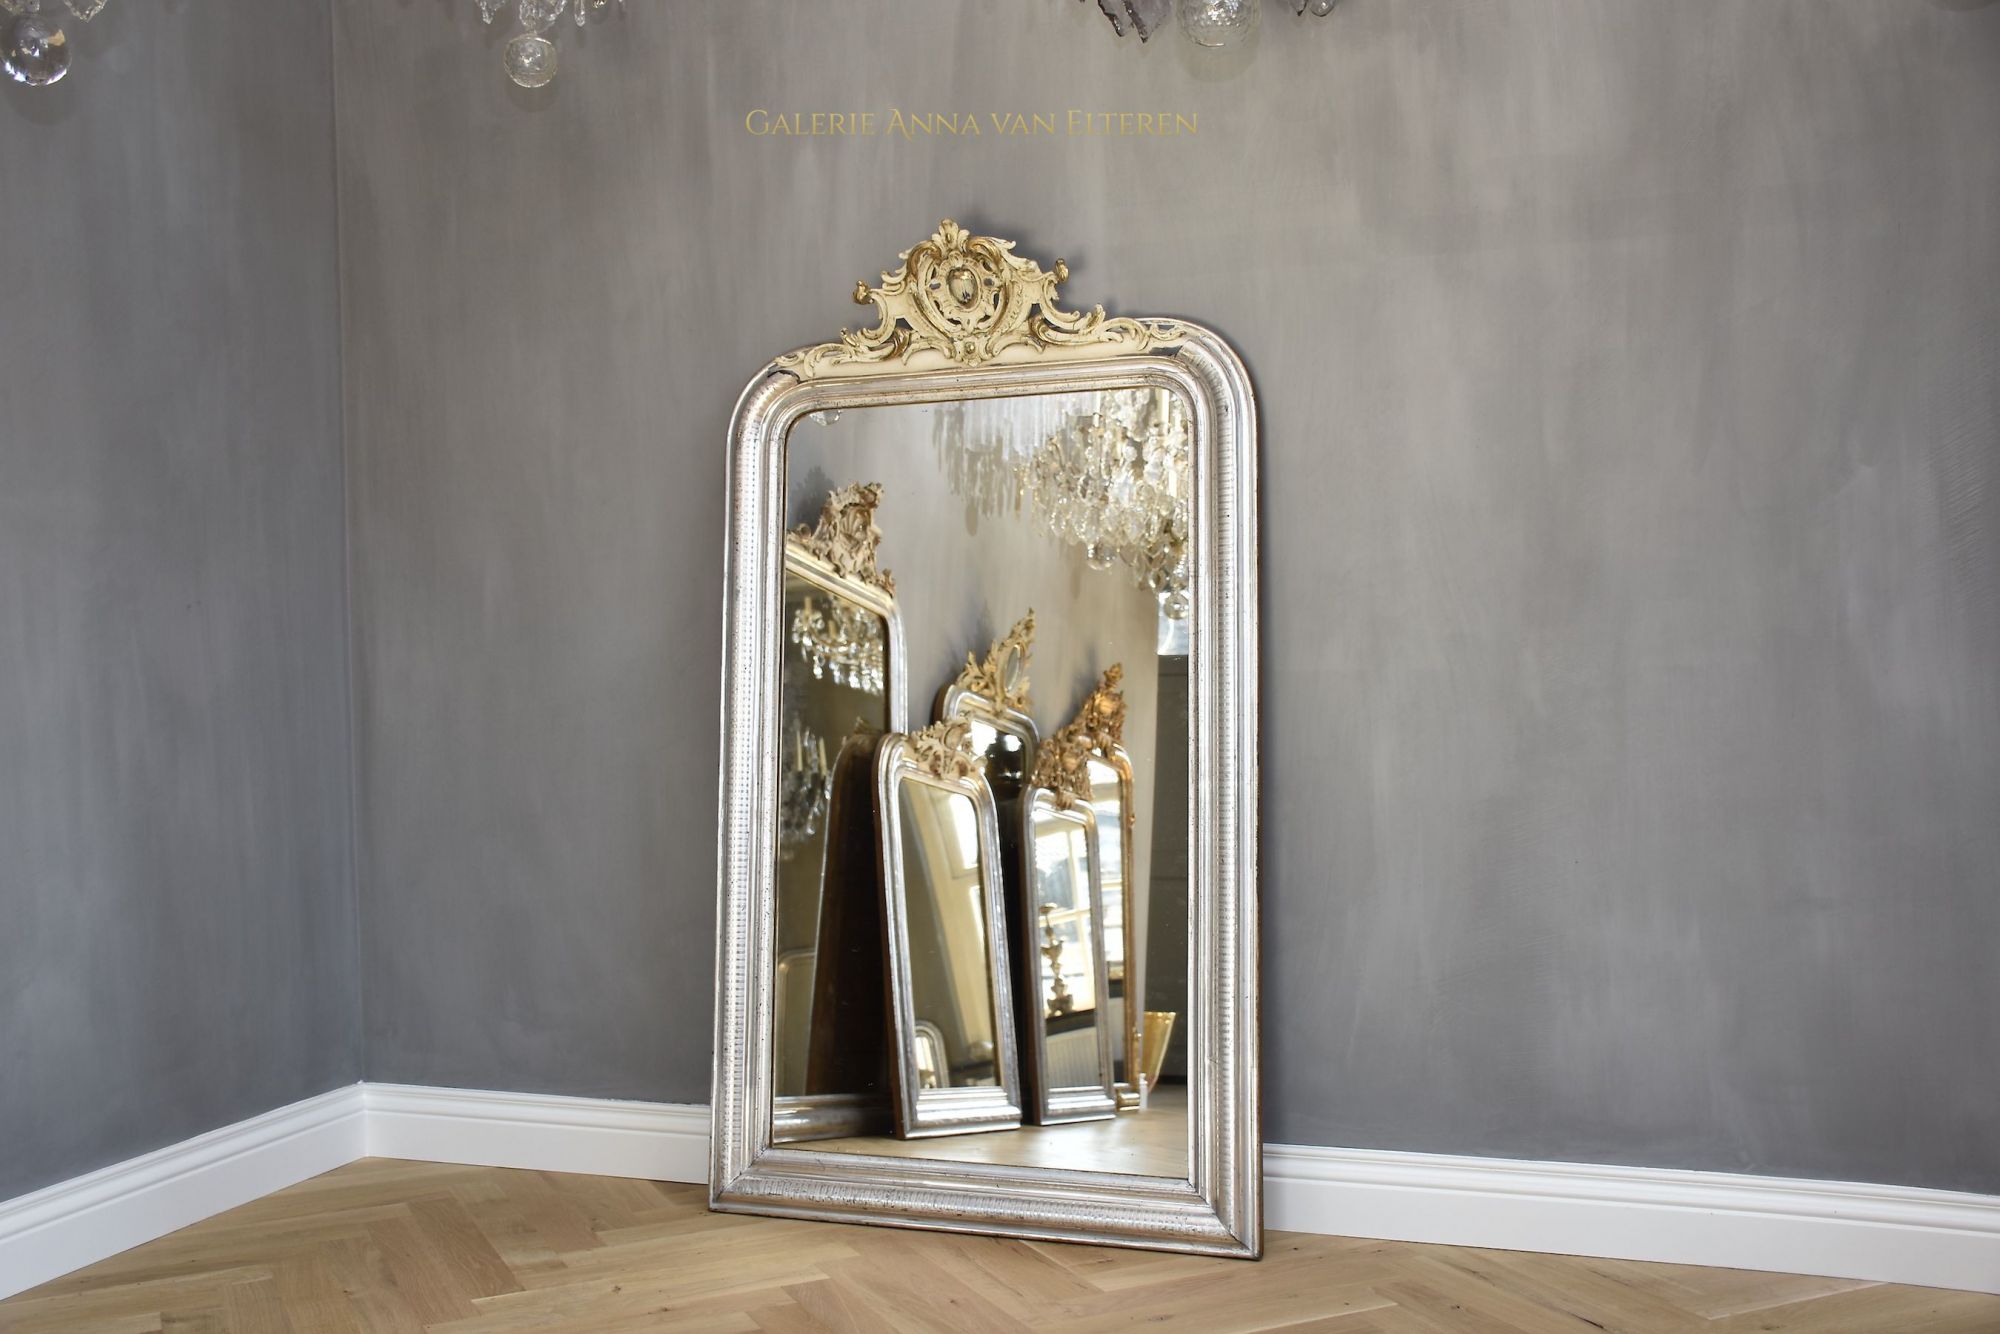 French 19th Century Gold Gilt Louis Philippe Mirror with Crest